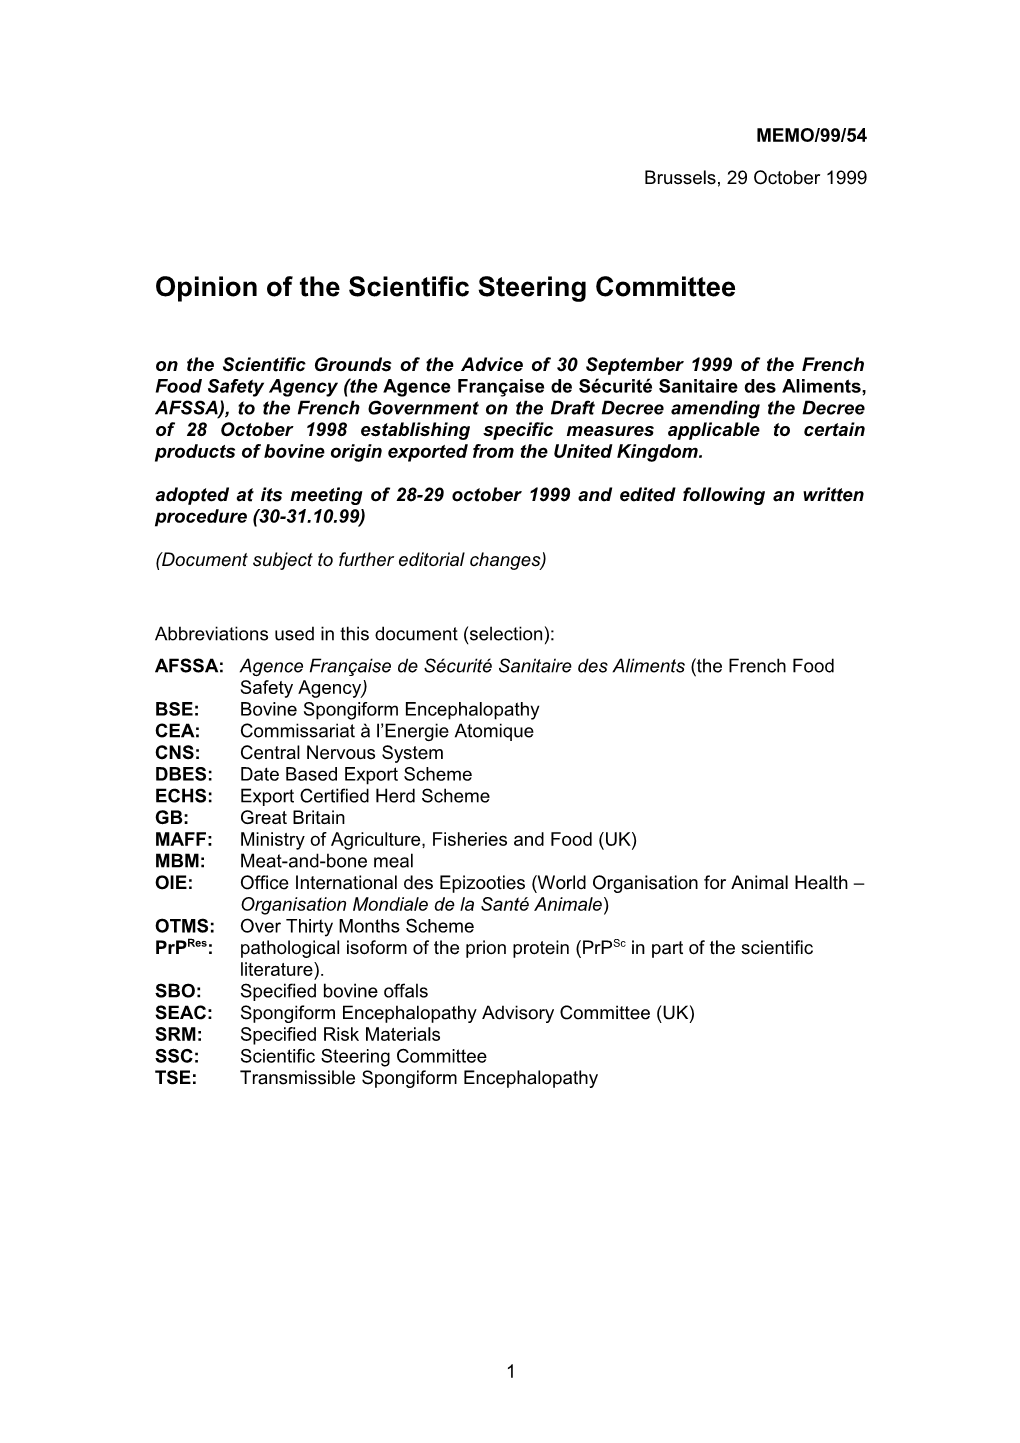 Opinion of the Scientific Steering Committee